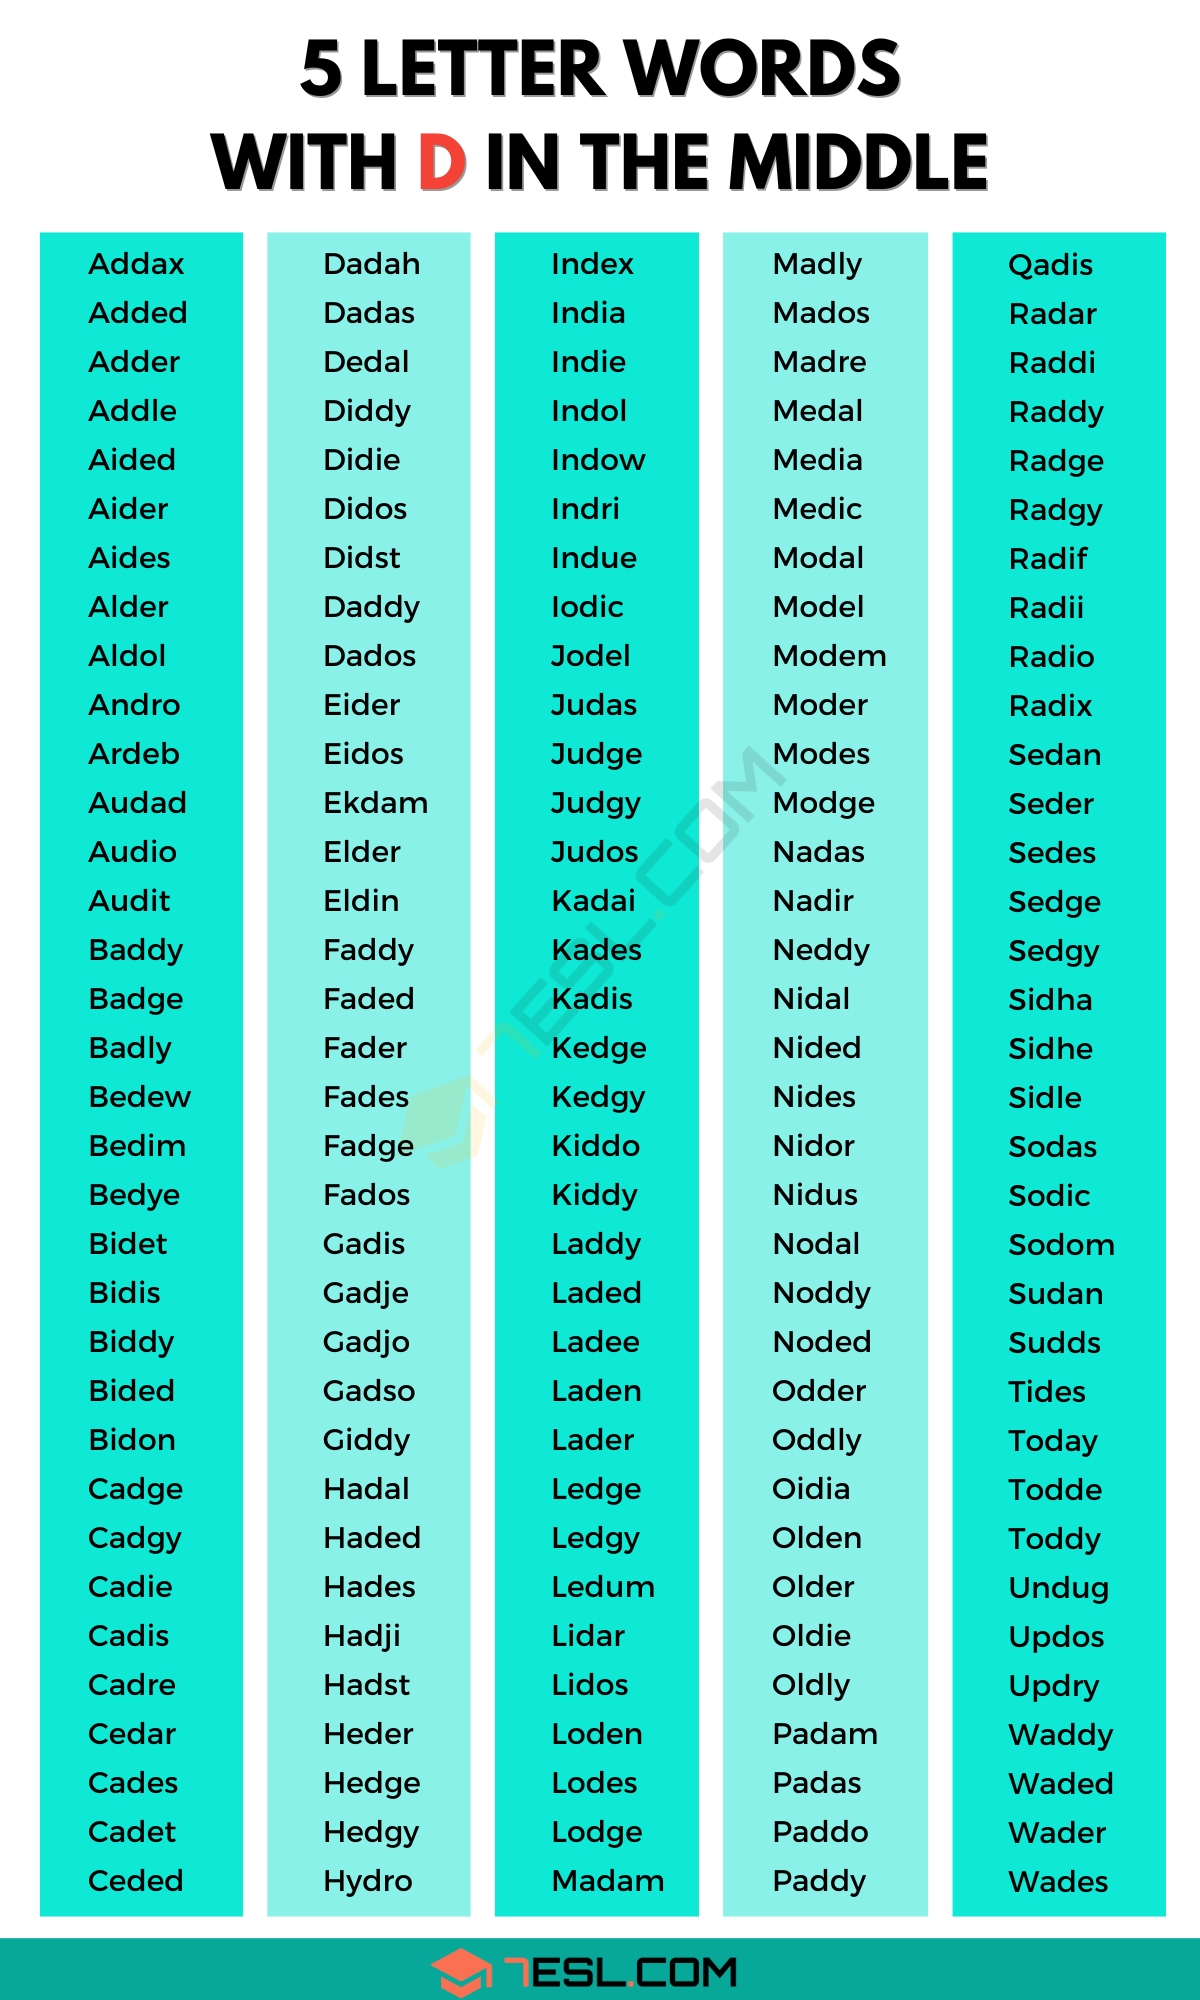 5 letter words with ead in the middle